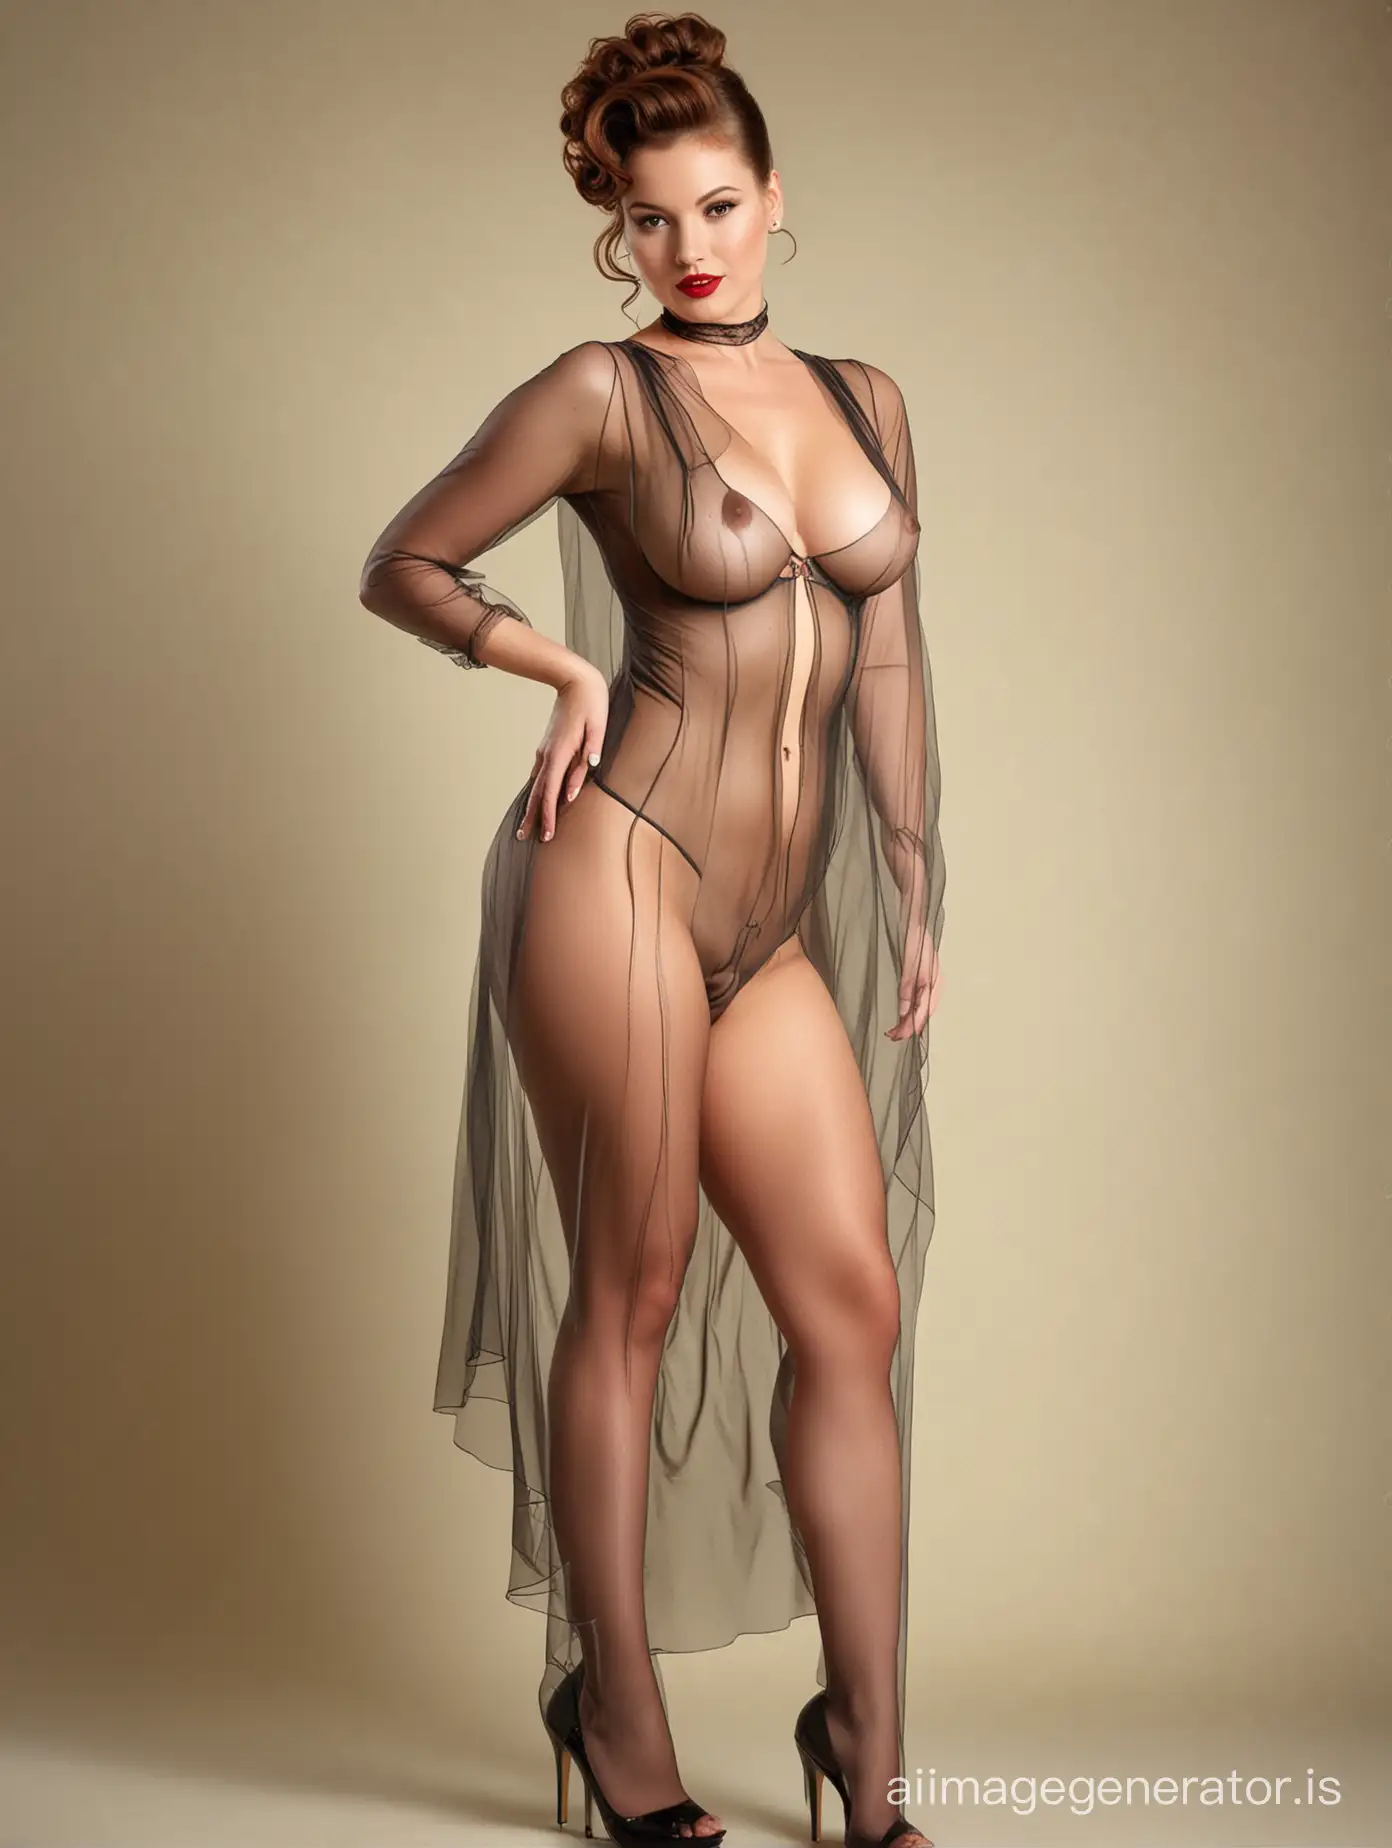 Voluptuous nude woman in a sheer body stocking in the style of Gil elvgren